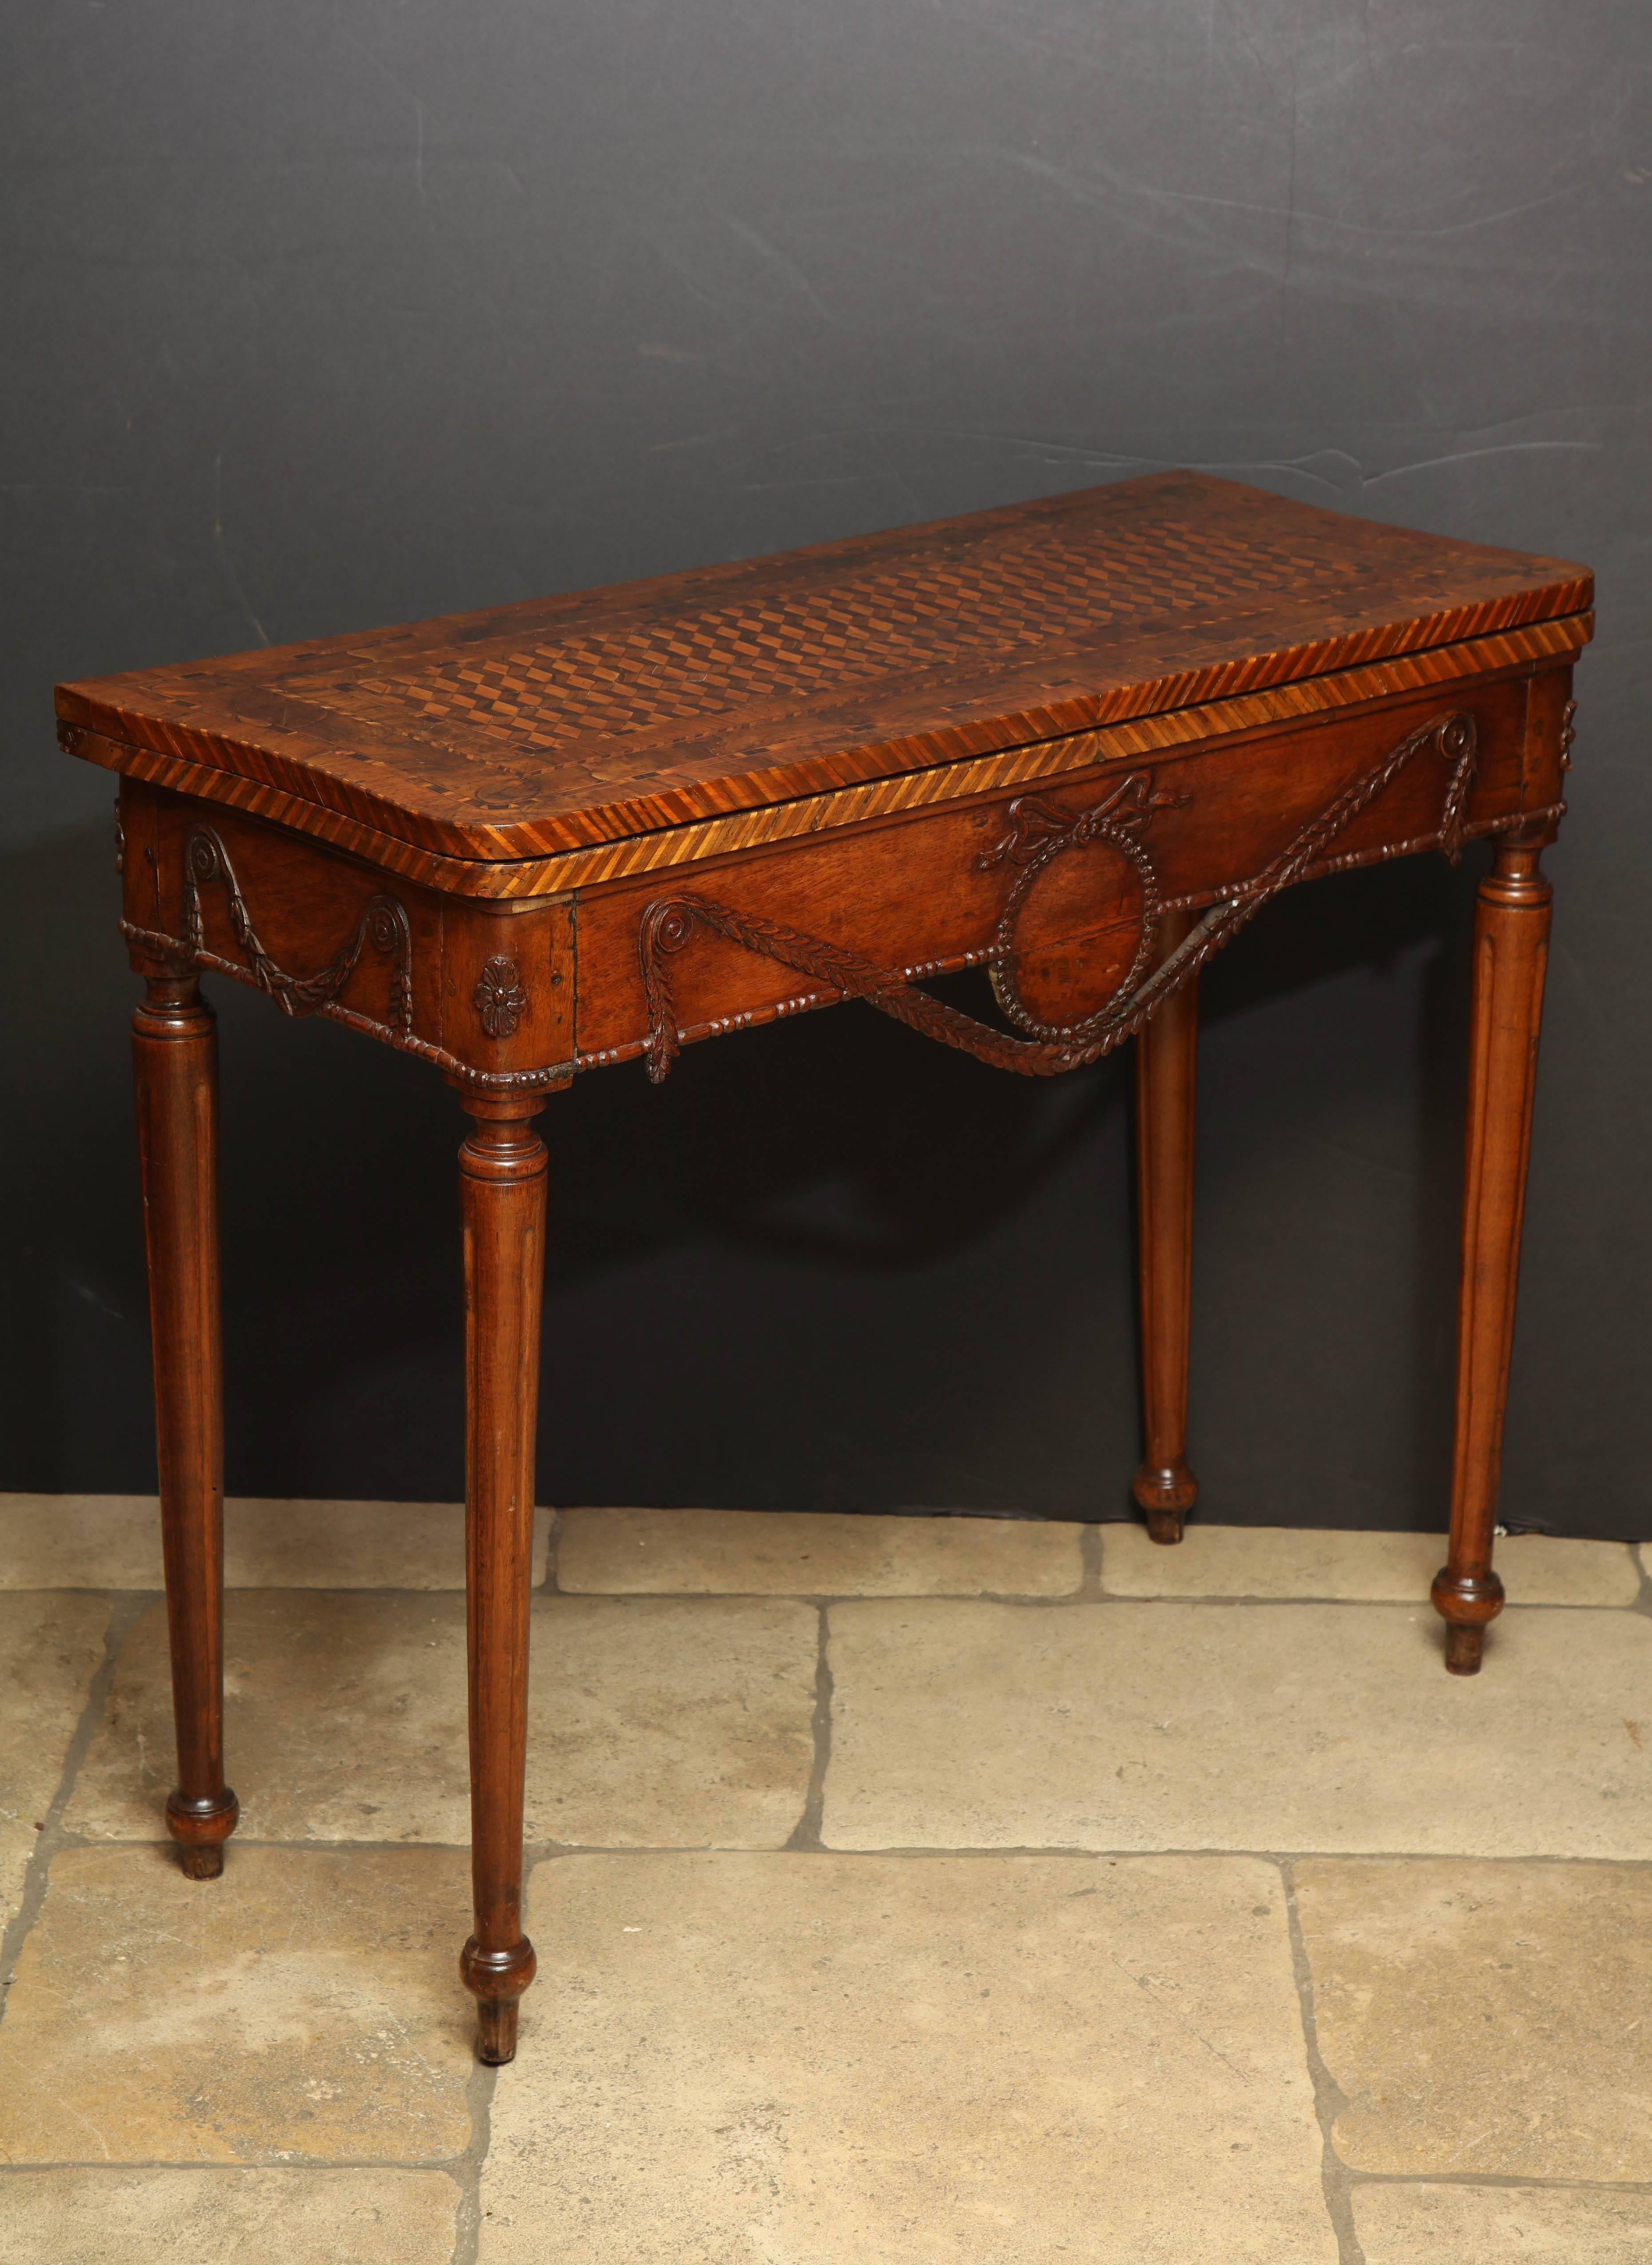 An unusual Louis XVI carved walnut flip-top game table with parquetry inlaid veneers, carved bownkot and garlands about turned fluted legs.